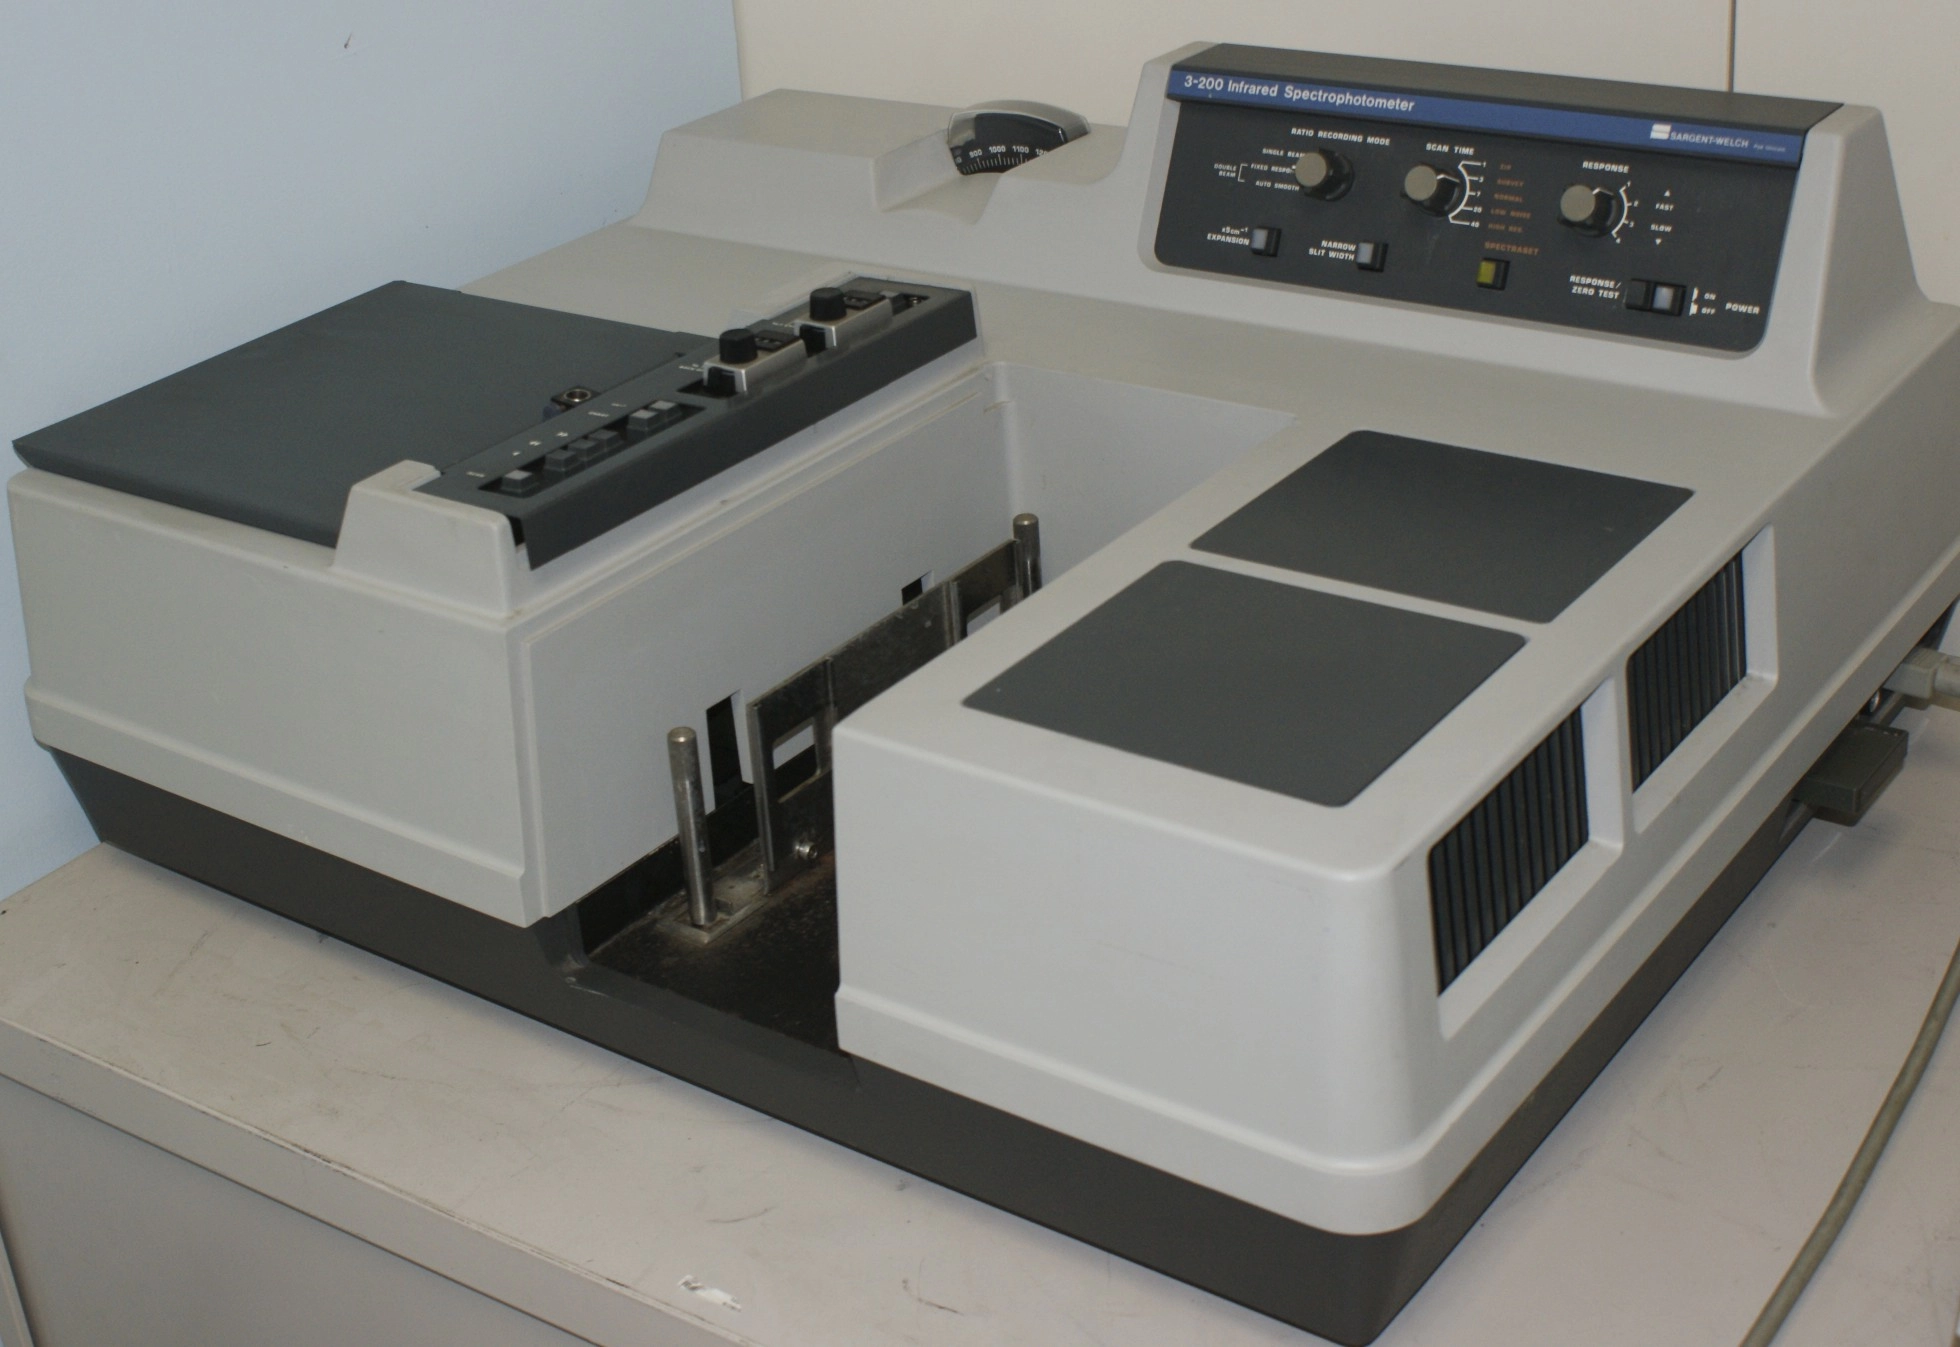 Sargent Welch Infrared Spectrophotometer Sargent Welch 3-200 Infrared Spectrophotometer Sargent Welch Ratio Recording Infrare